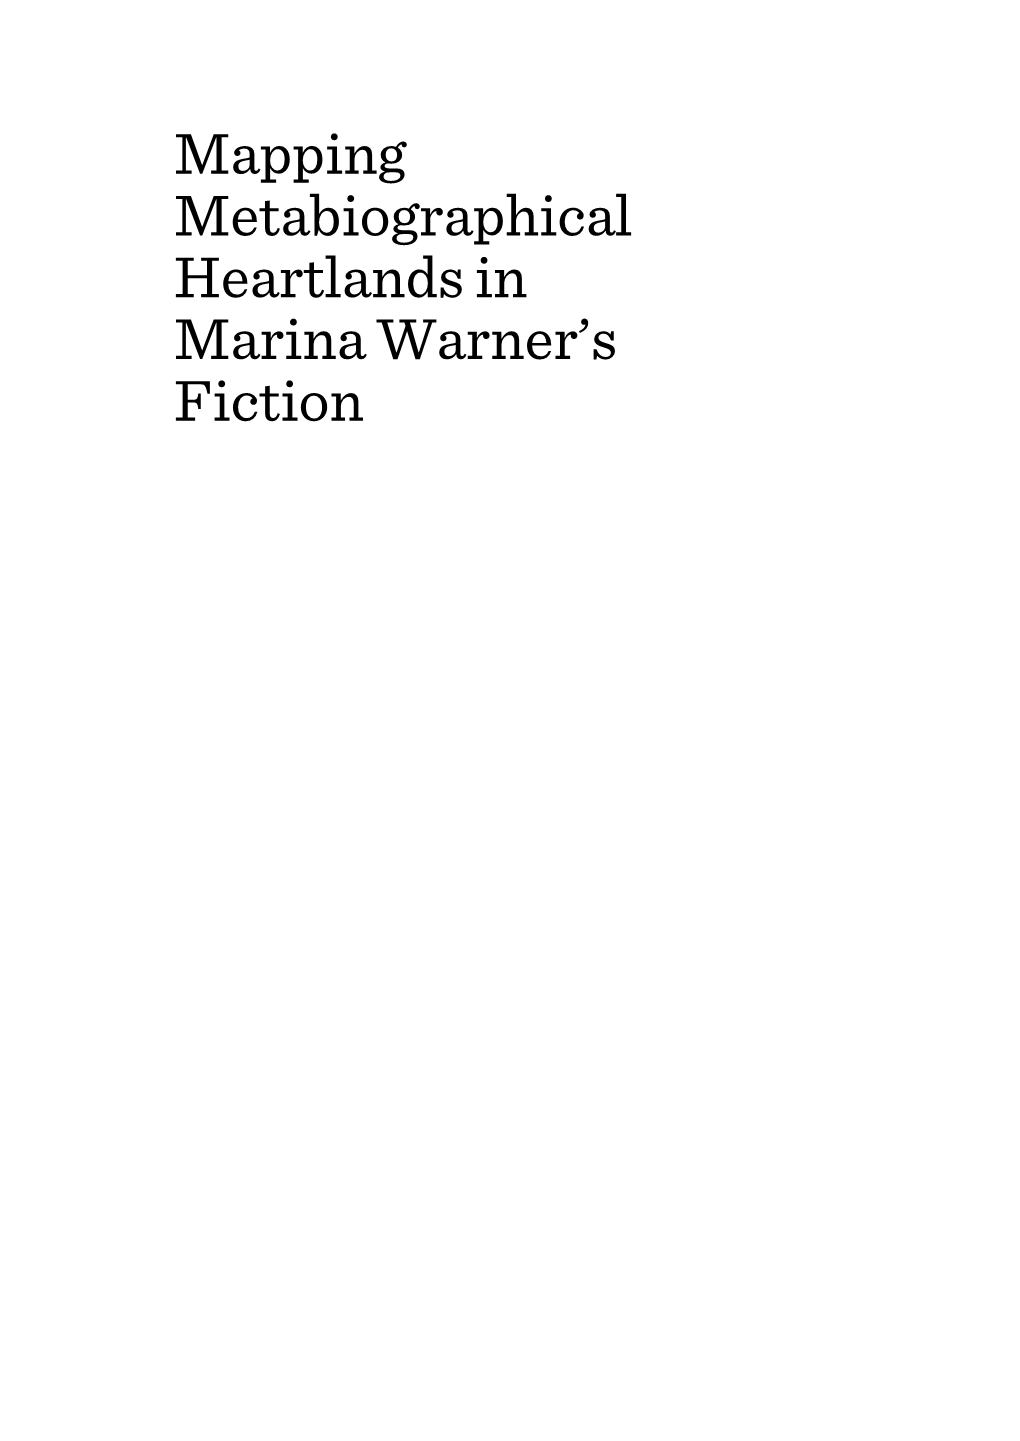 Mapping Metabiographical Heartlands in Marina Warner's Fiction